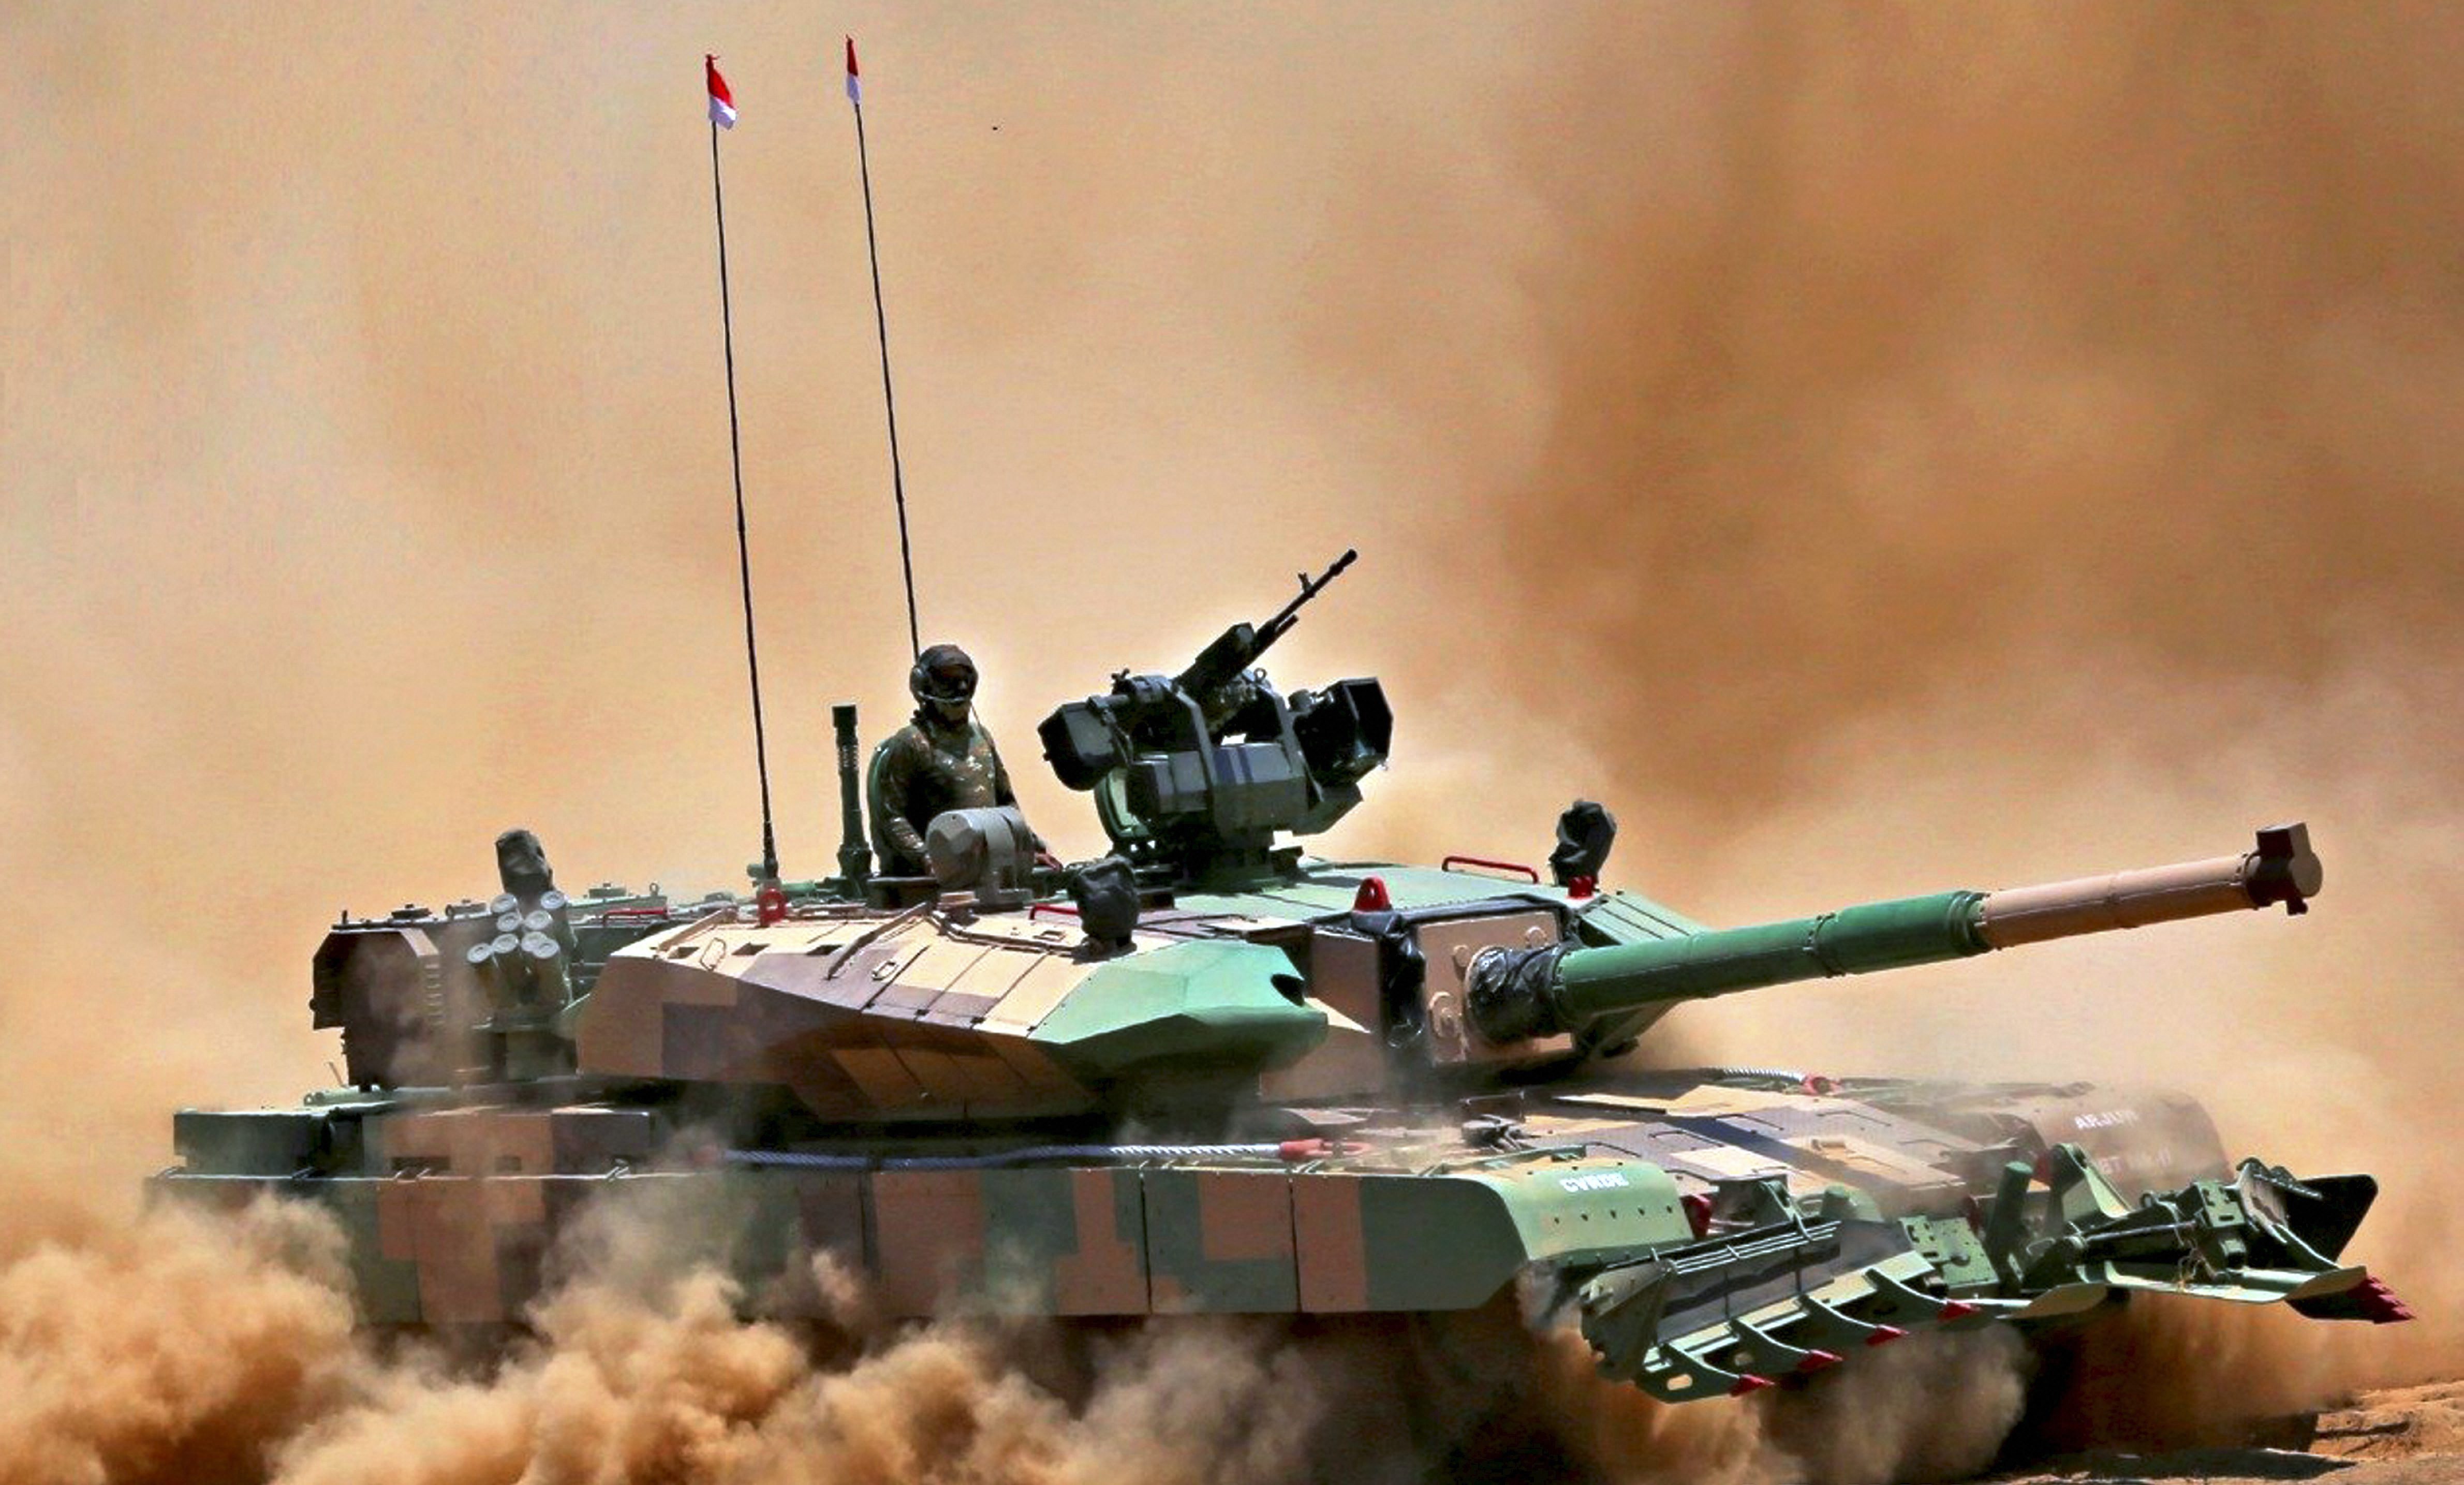 China's military spend exceeds India, Australia, Japan, Korea's jointly